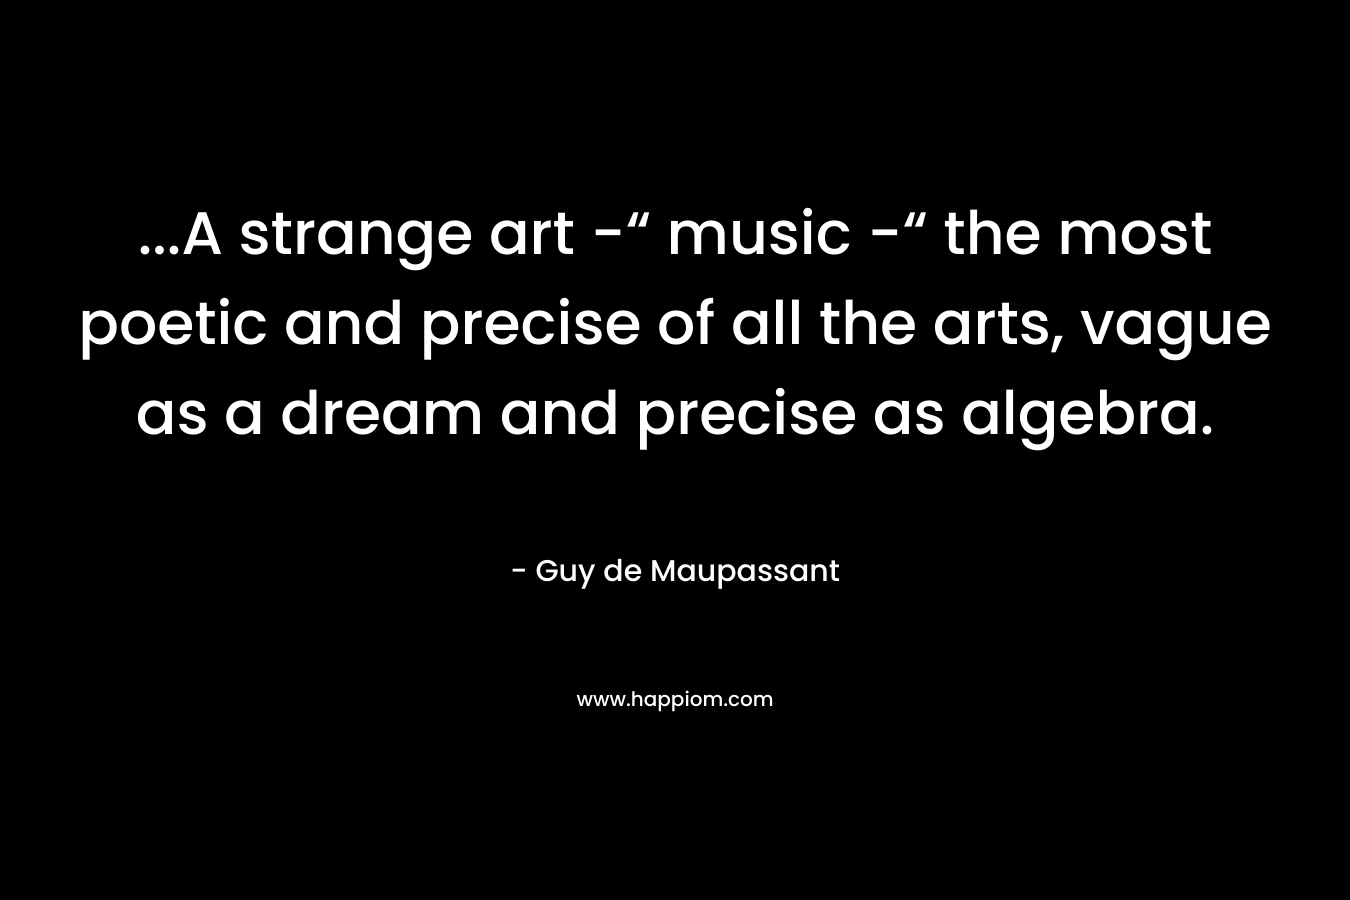 …A strange art -“ music -“ the most poetic and precise of all the arts, vague as a dream and precise as algebra. – Guy de Maupassant